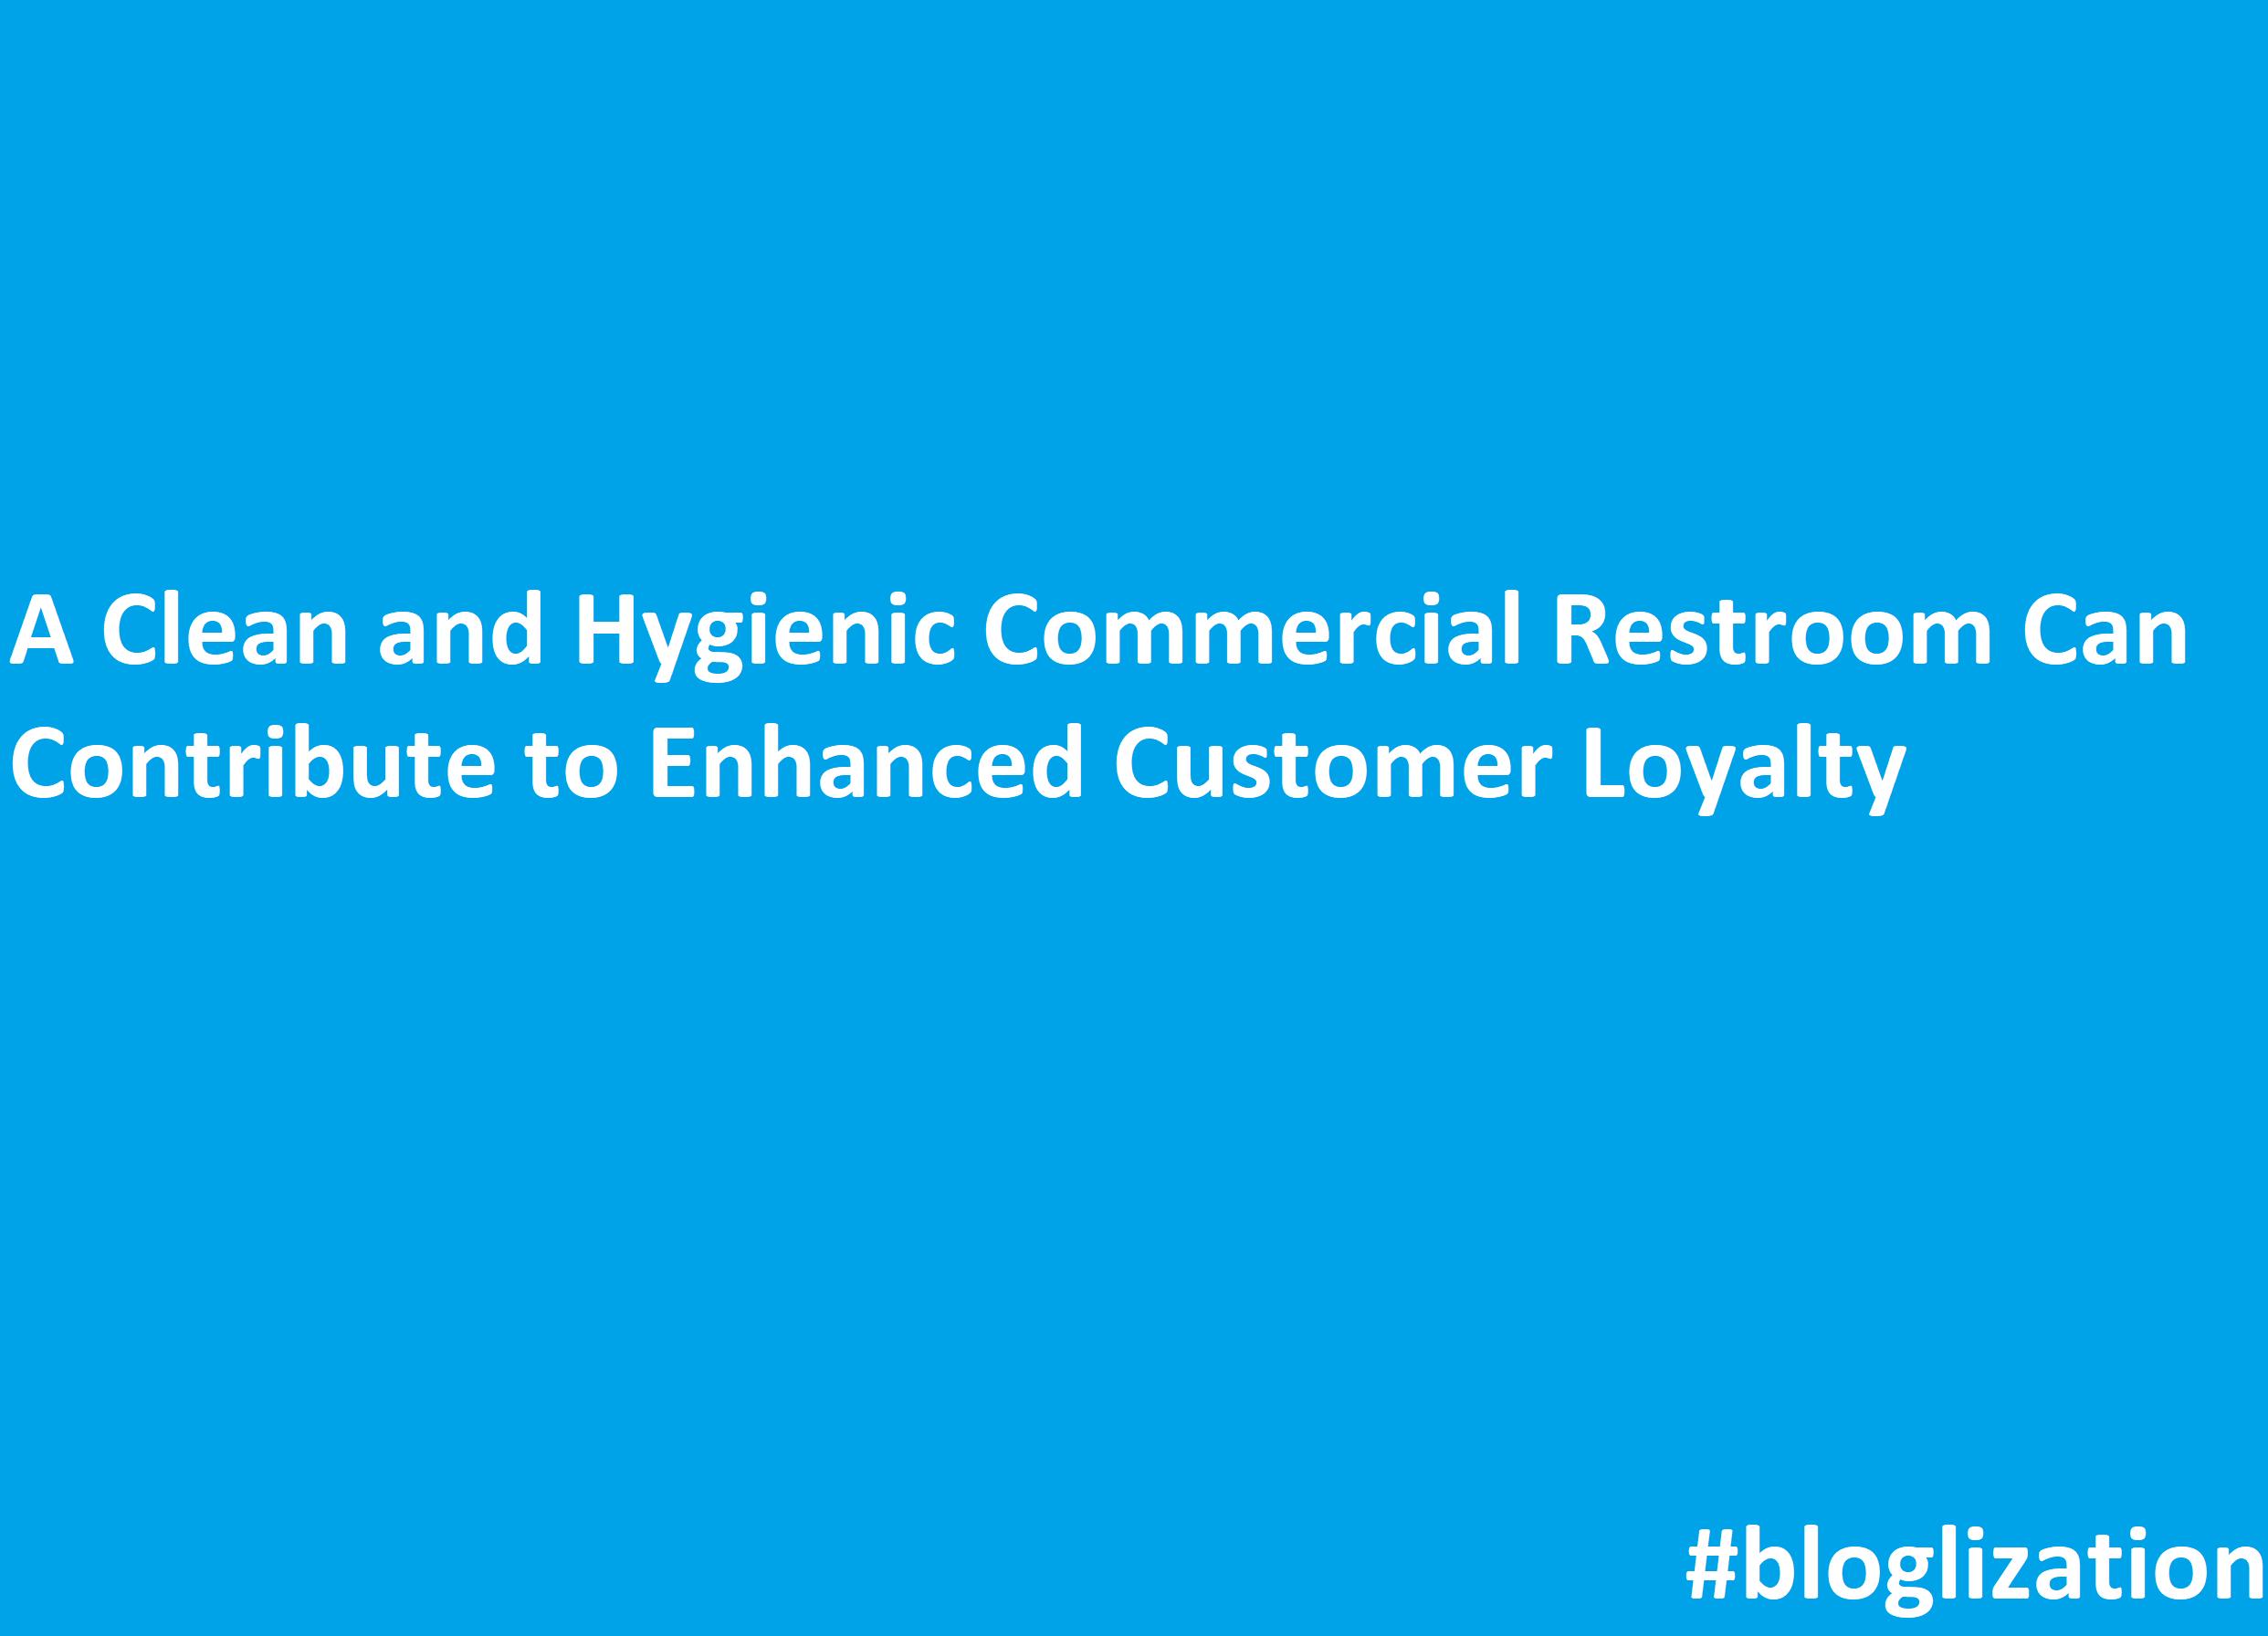 A Clean and Hygienic Commercial Restroom Can Contribute to Enhanced Customer Loyalty